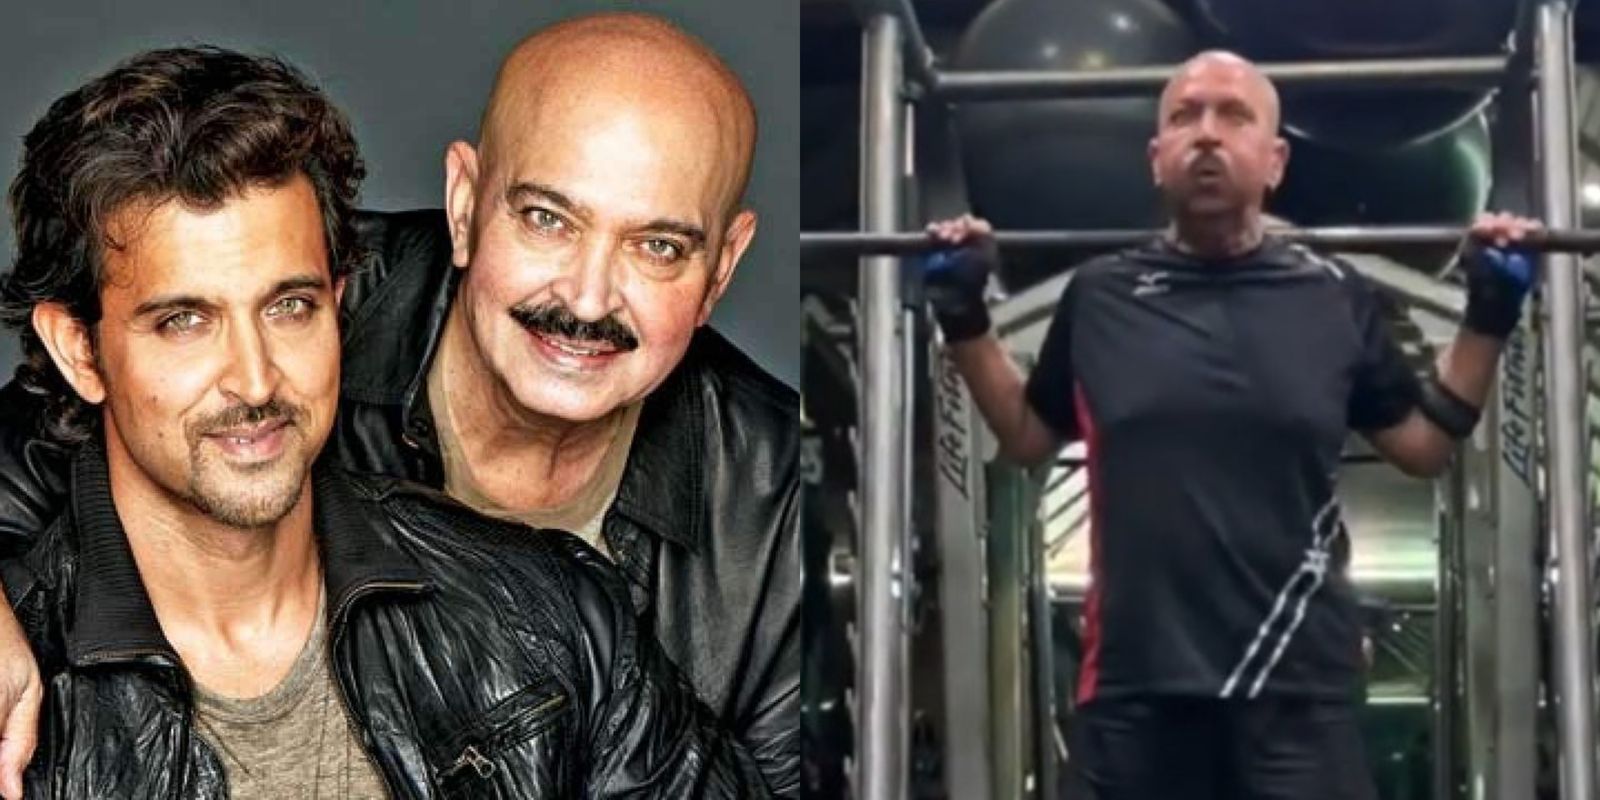 Hrithik Roshan Shares Rakesh Roshan’s Work Out Video; Says ‘This Is More Inspiring To Me Than Anything Else’